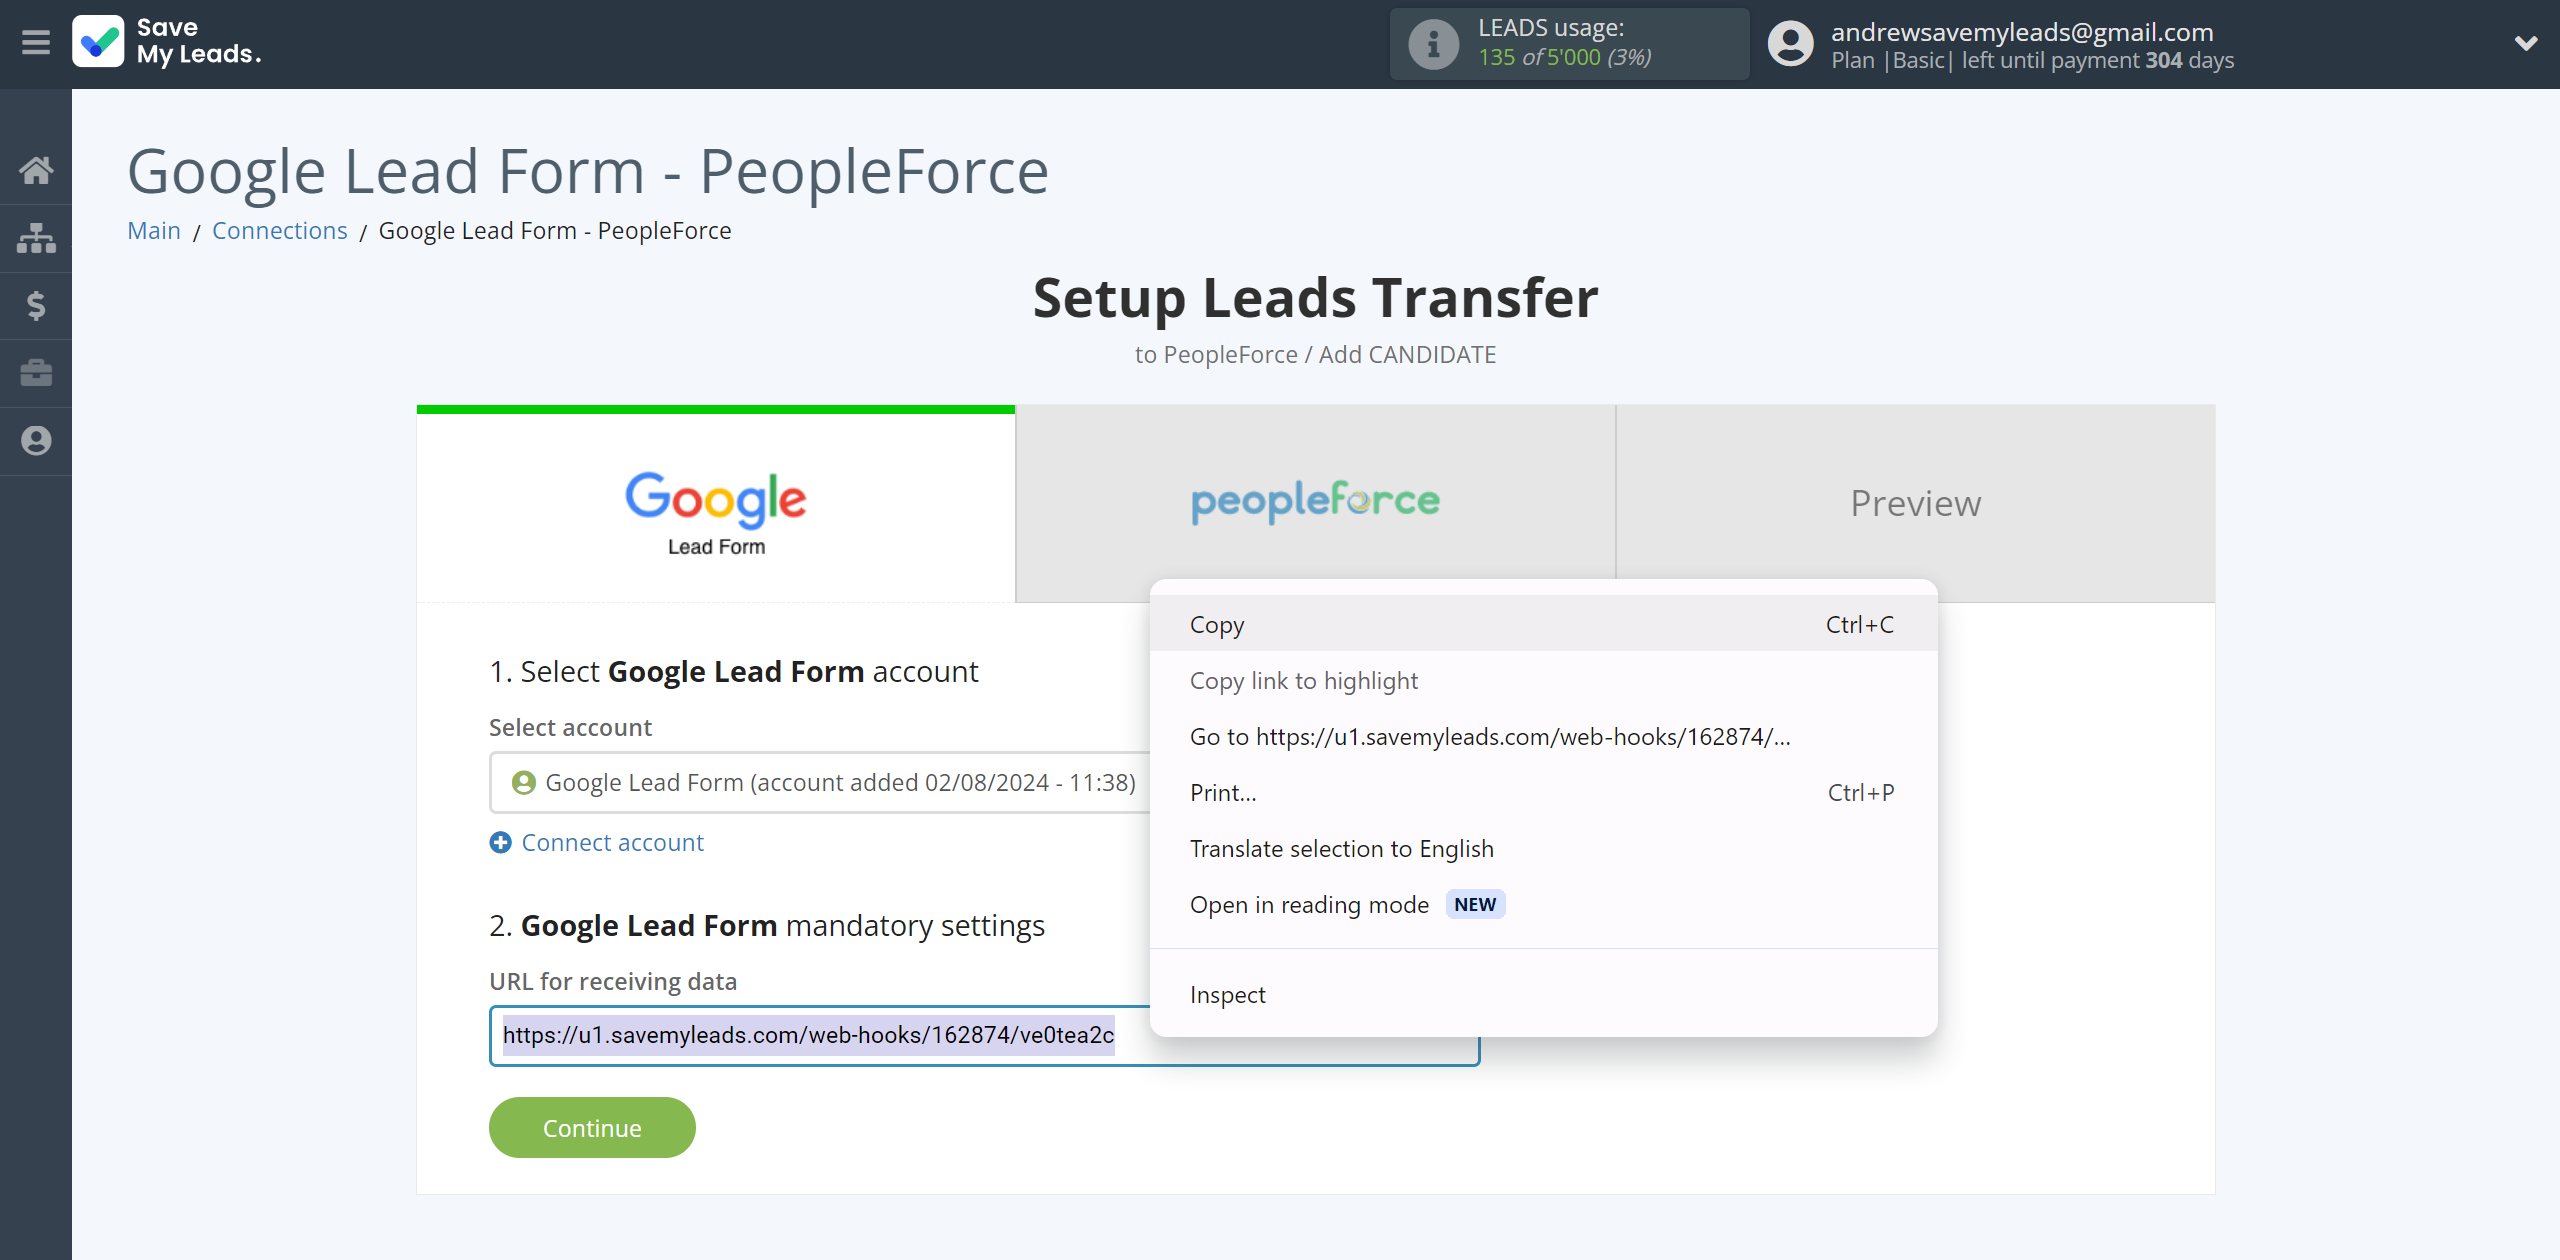 How to Connect Google Lead Form with PeopleForce Add Candidate | Data Source account connection